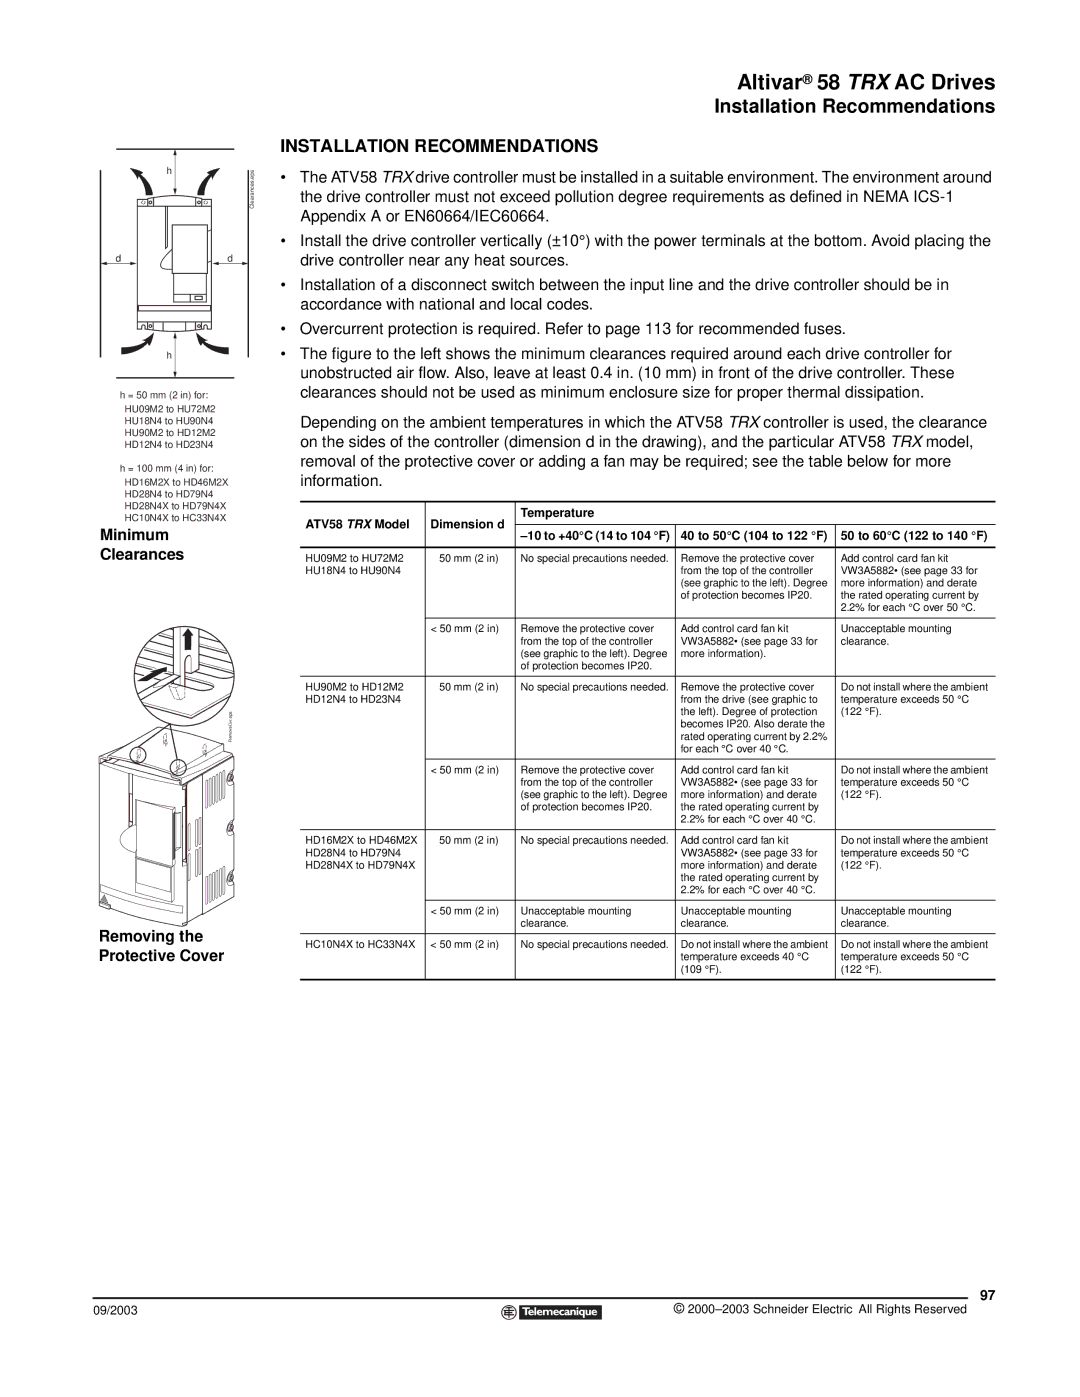 Schneider Electric 58 TRX manual Installation Recommendations, Minimum Clearances, Removing the Protective Cover 